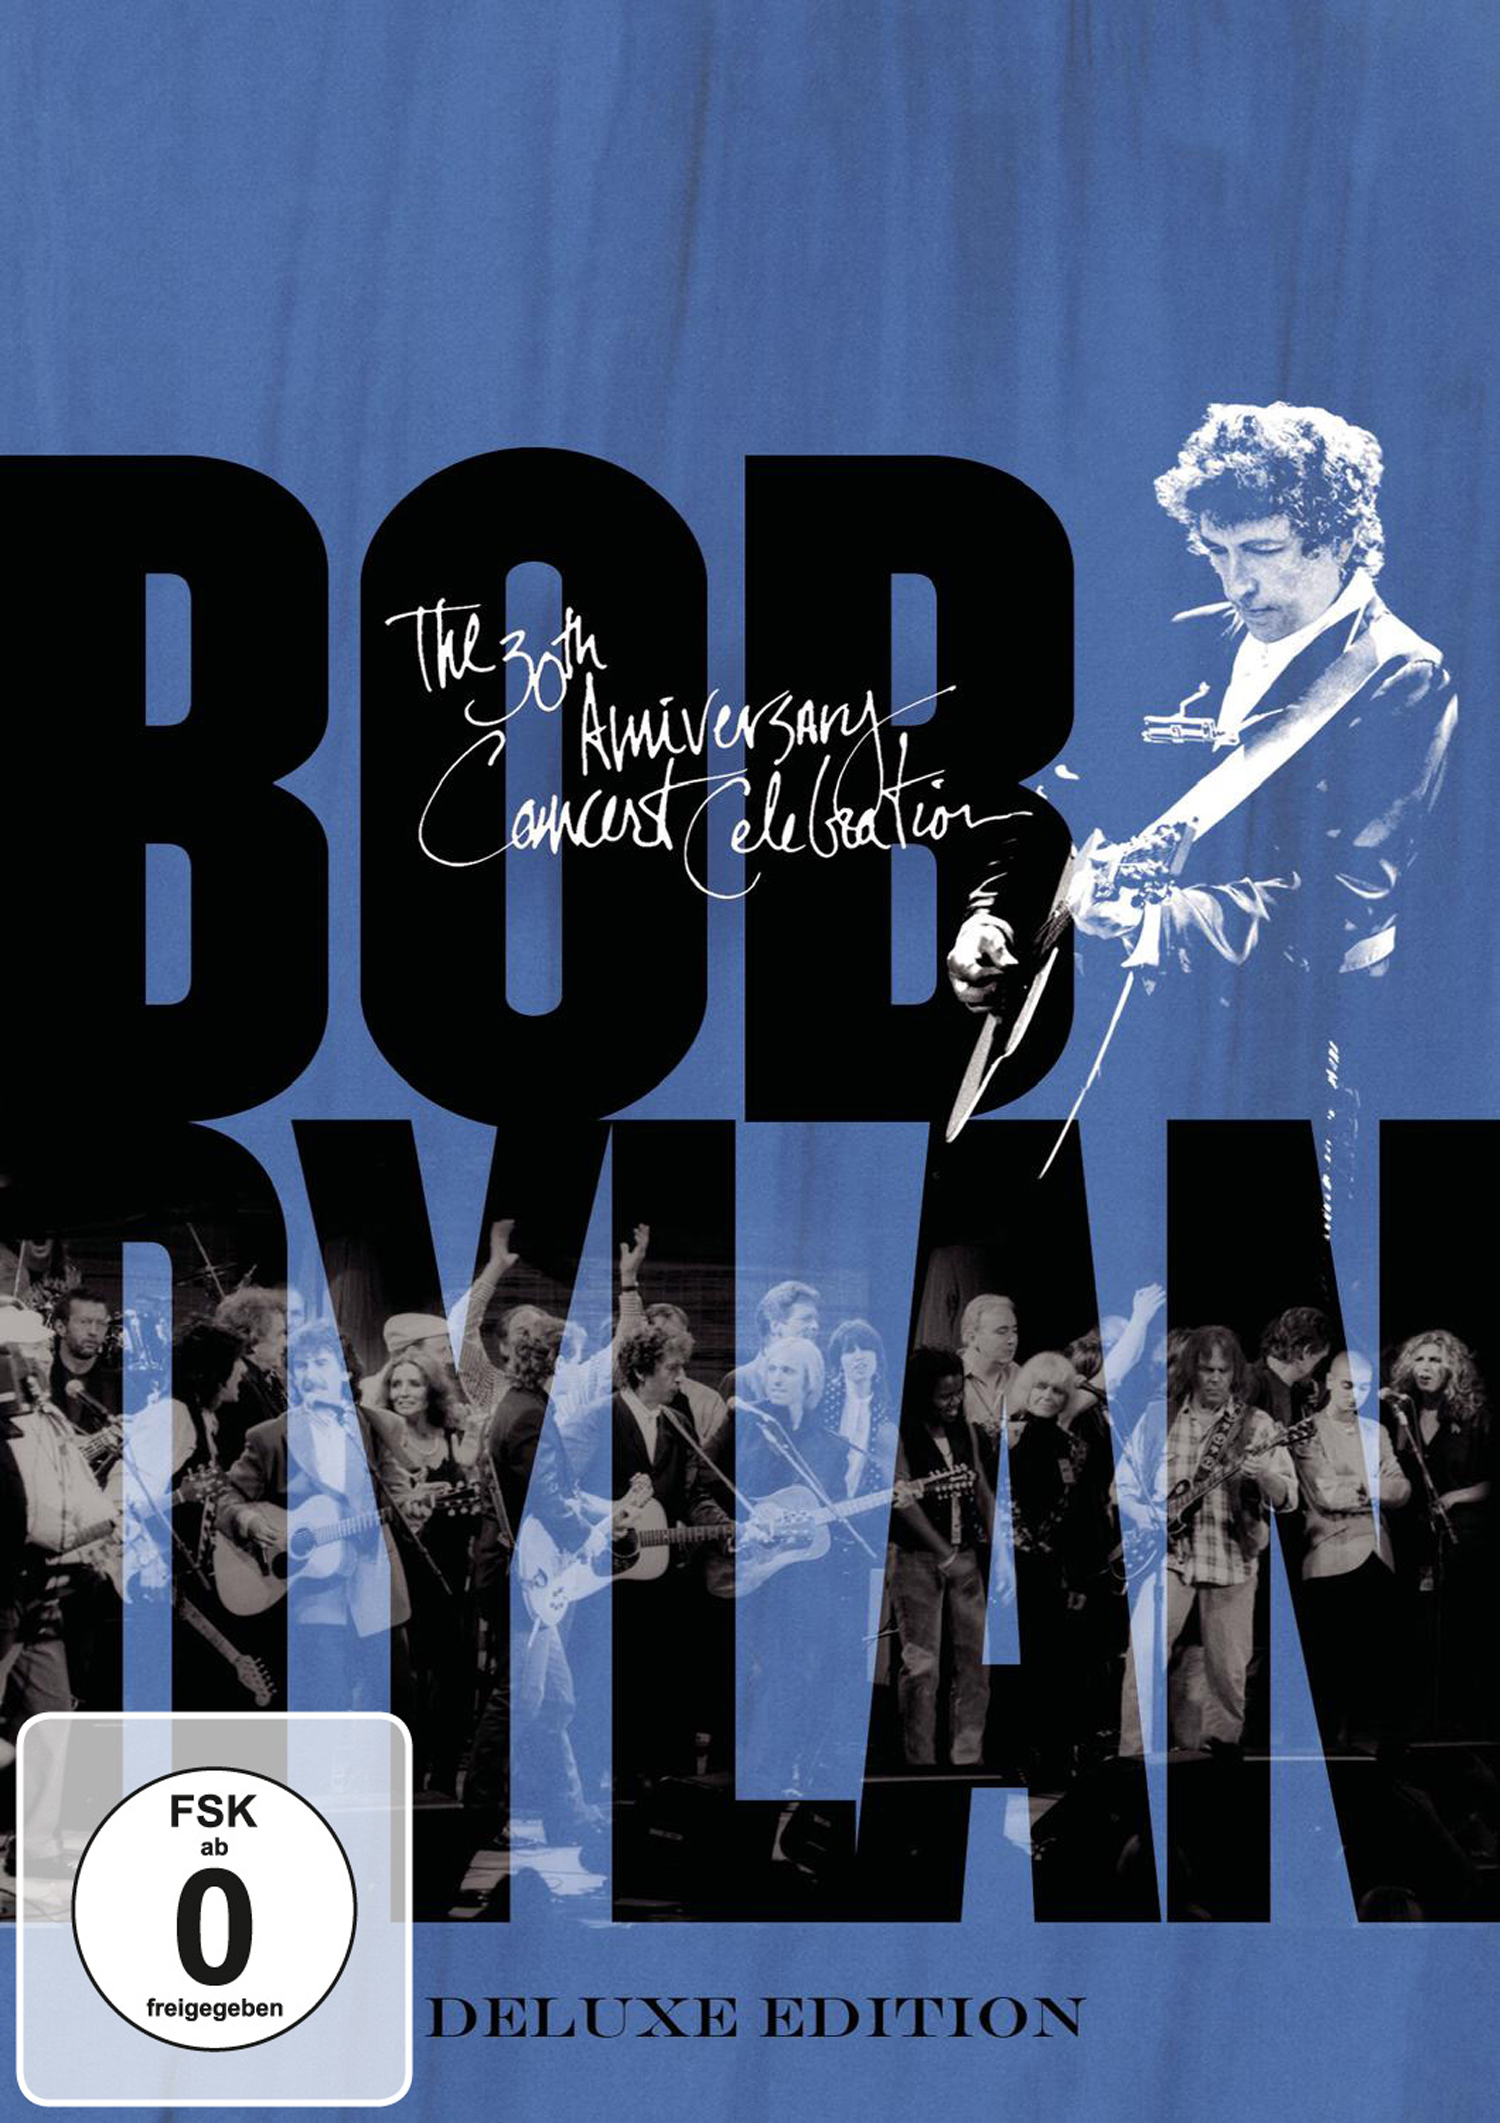 30th - Bob VARIOUS (Deluxe Edition) (DVD) Concert - Dylan, Anniversary Celebration